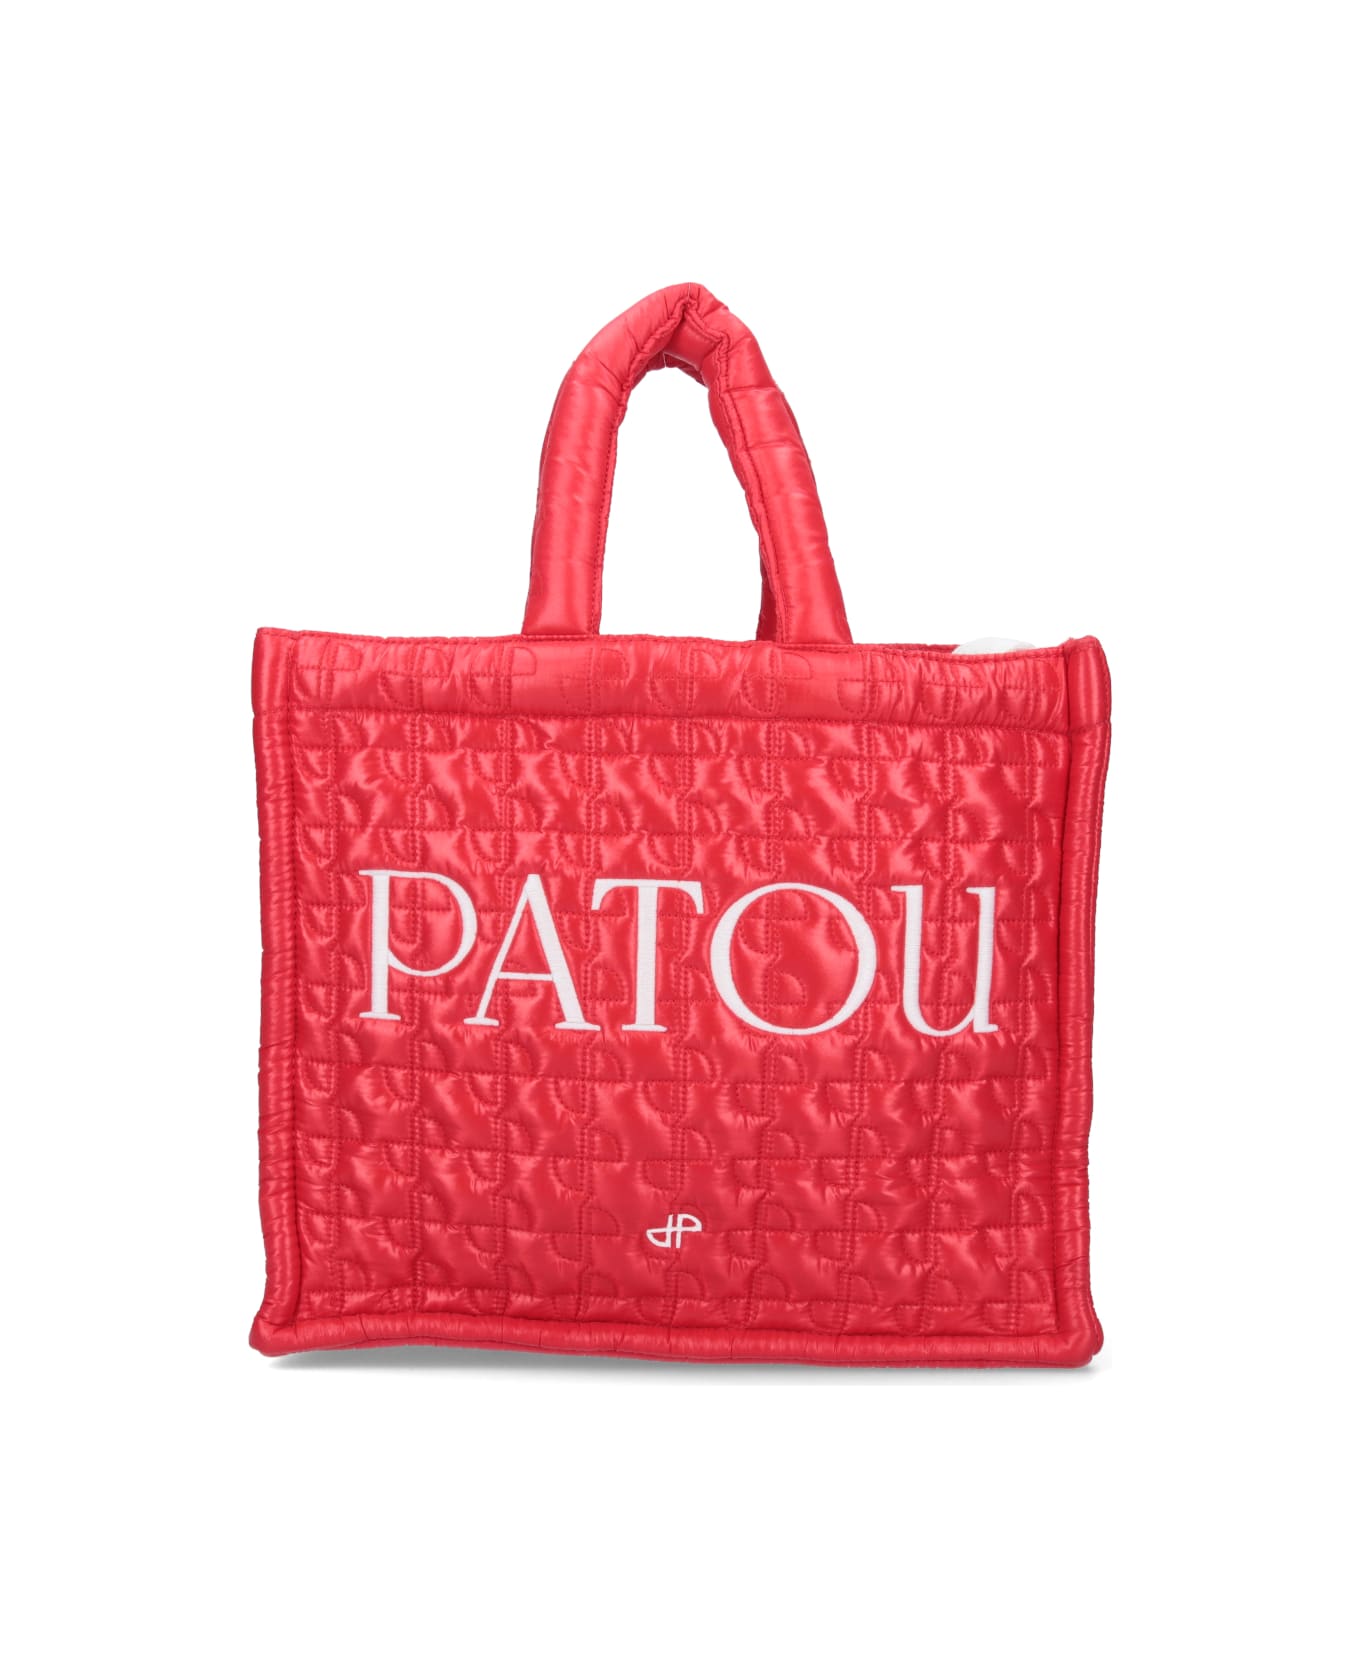 Patou Small Quilted Tote Bag - Red